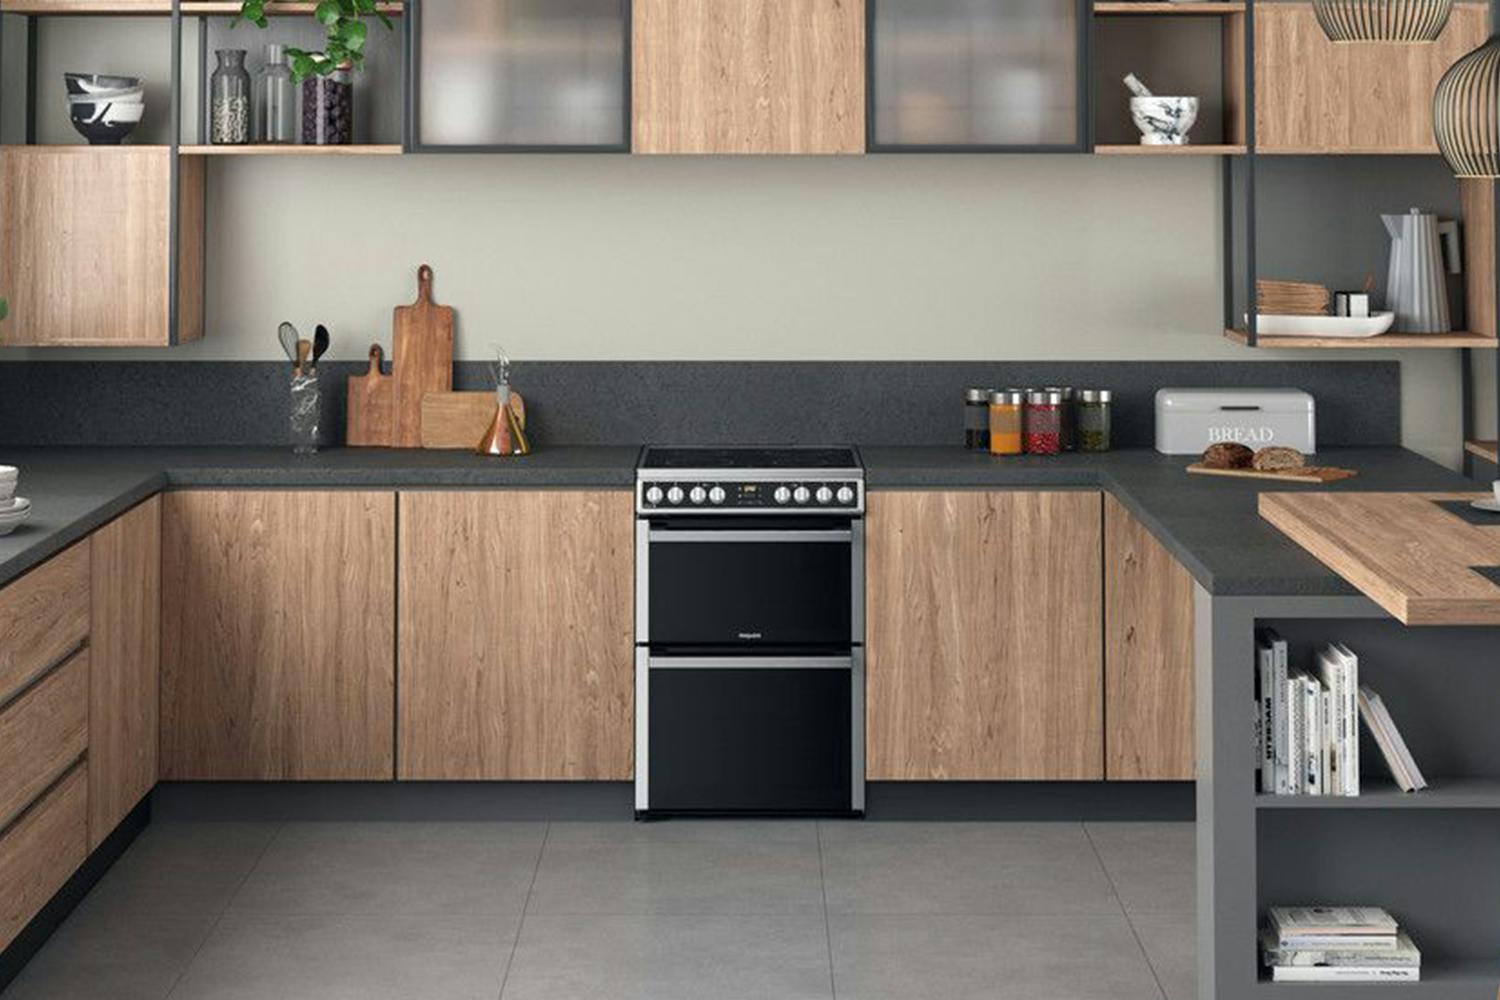 Hotpoint 60cm Electric Cooker with Double Oven | HDM67V8D2CXUK